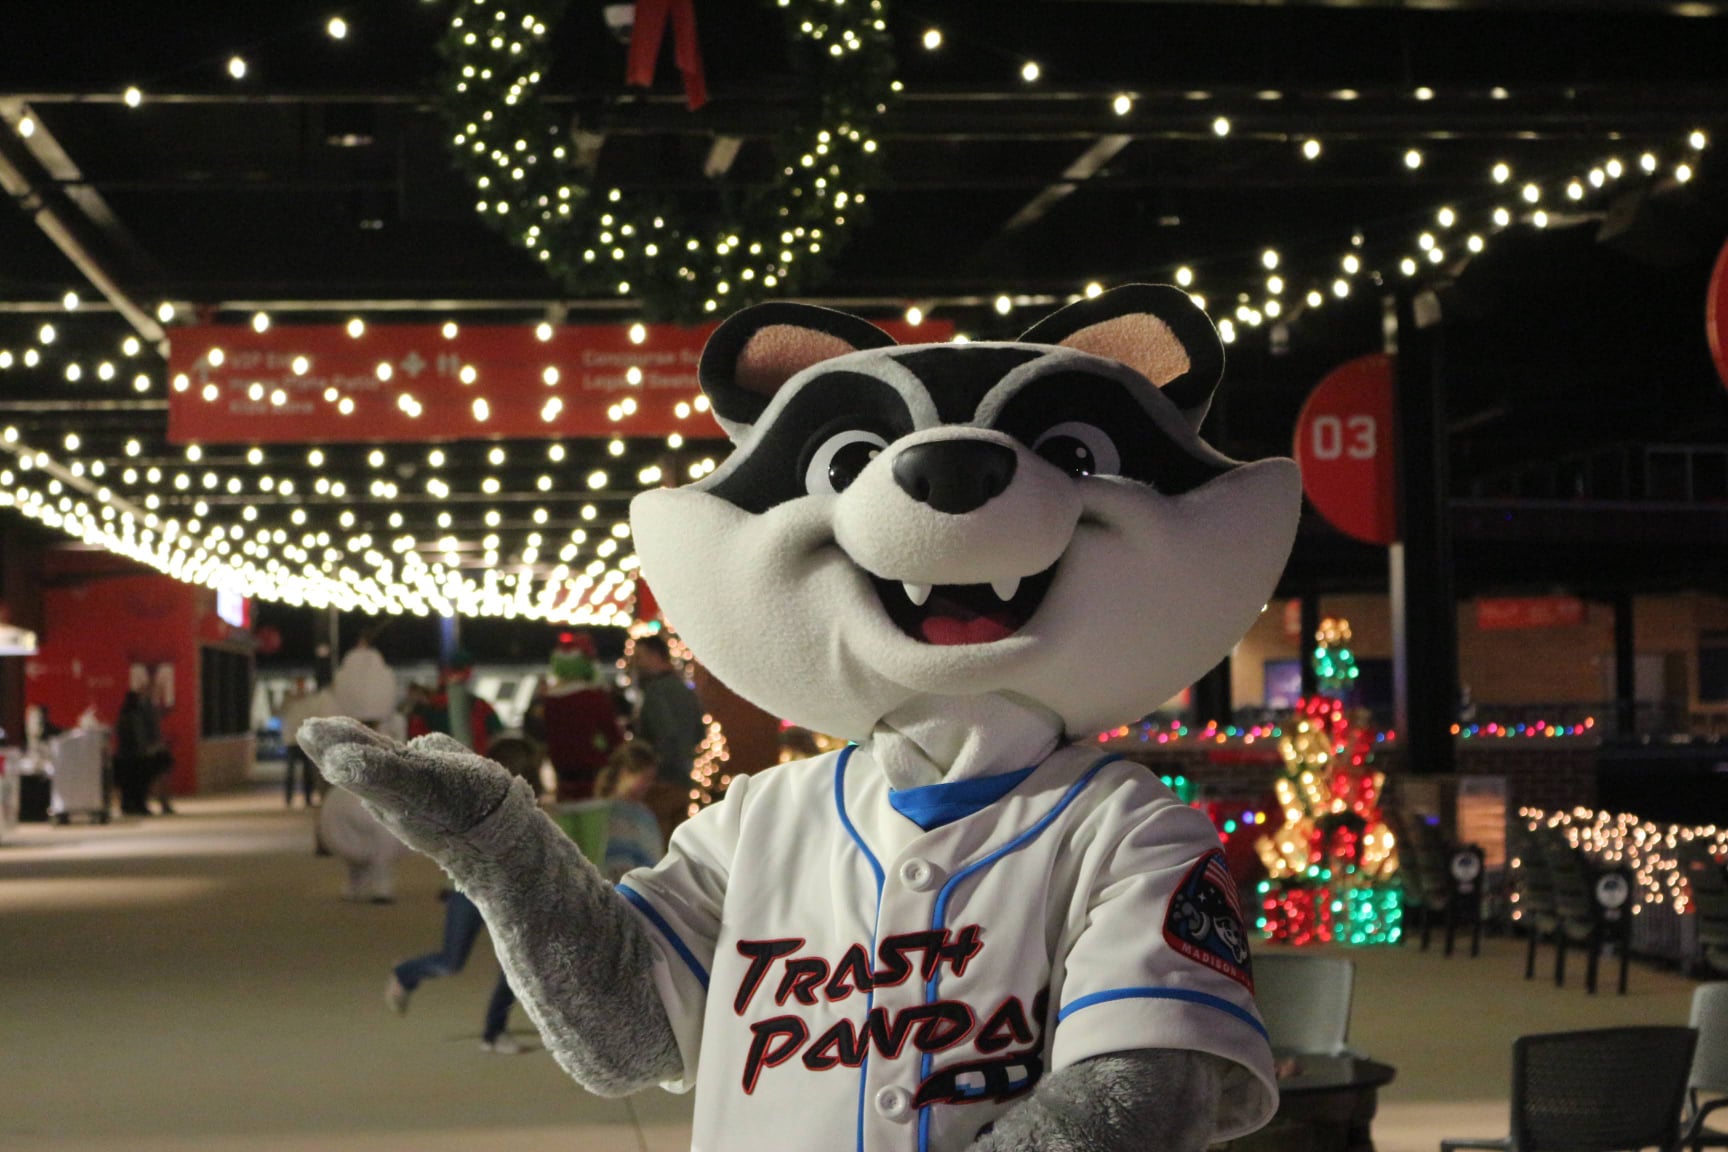 The Rocket City Christmas Spectacular at Toyota Field starts tonight